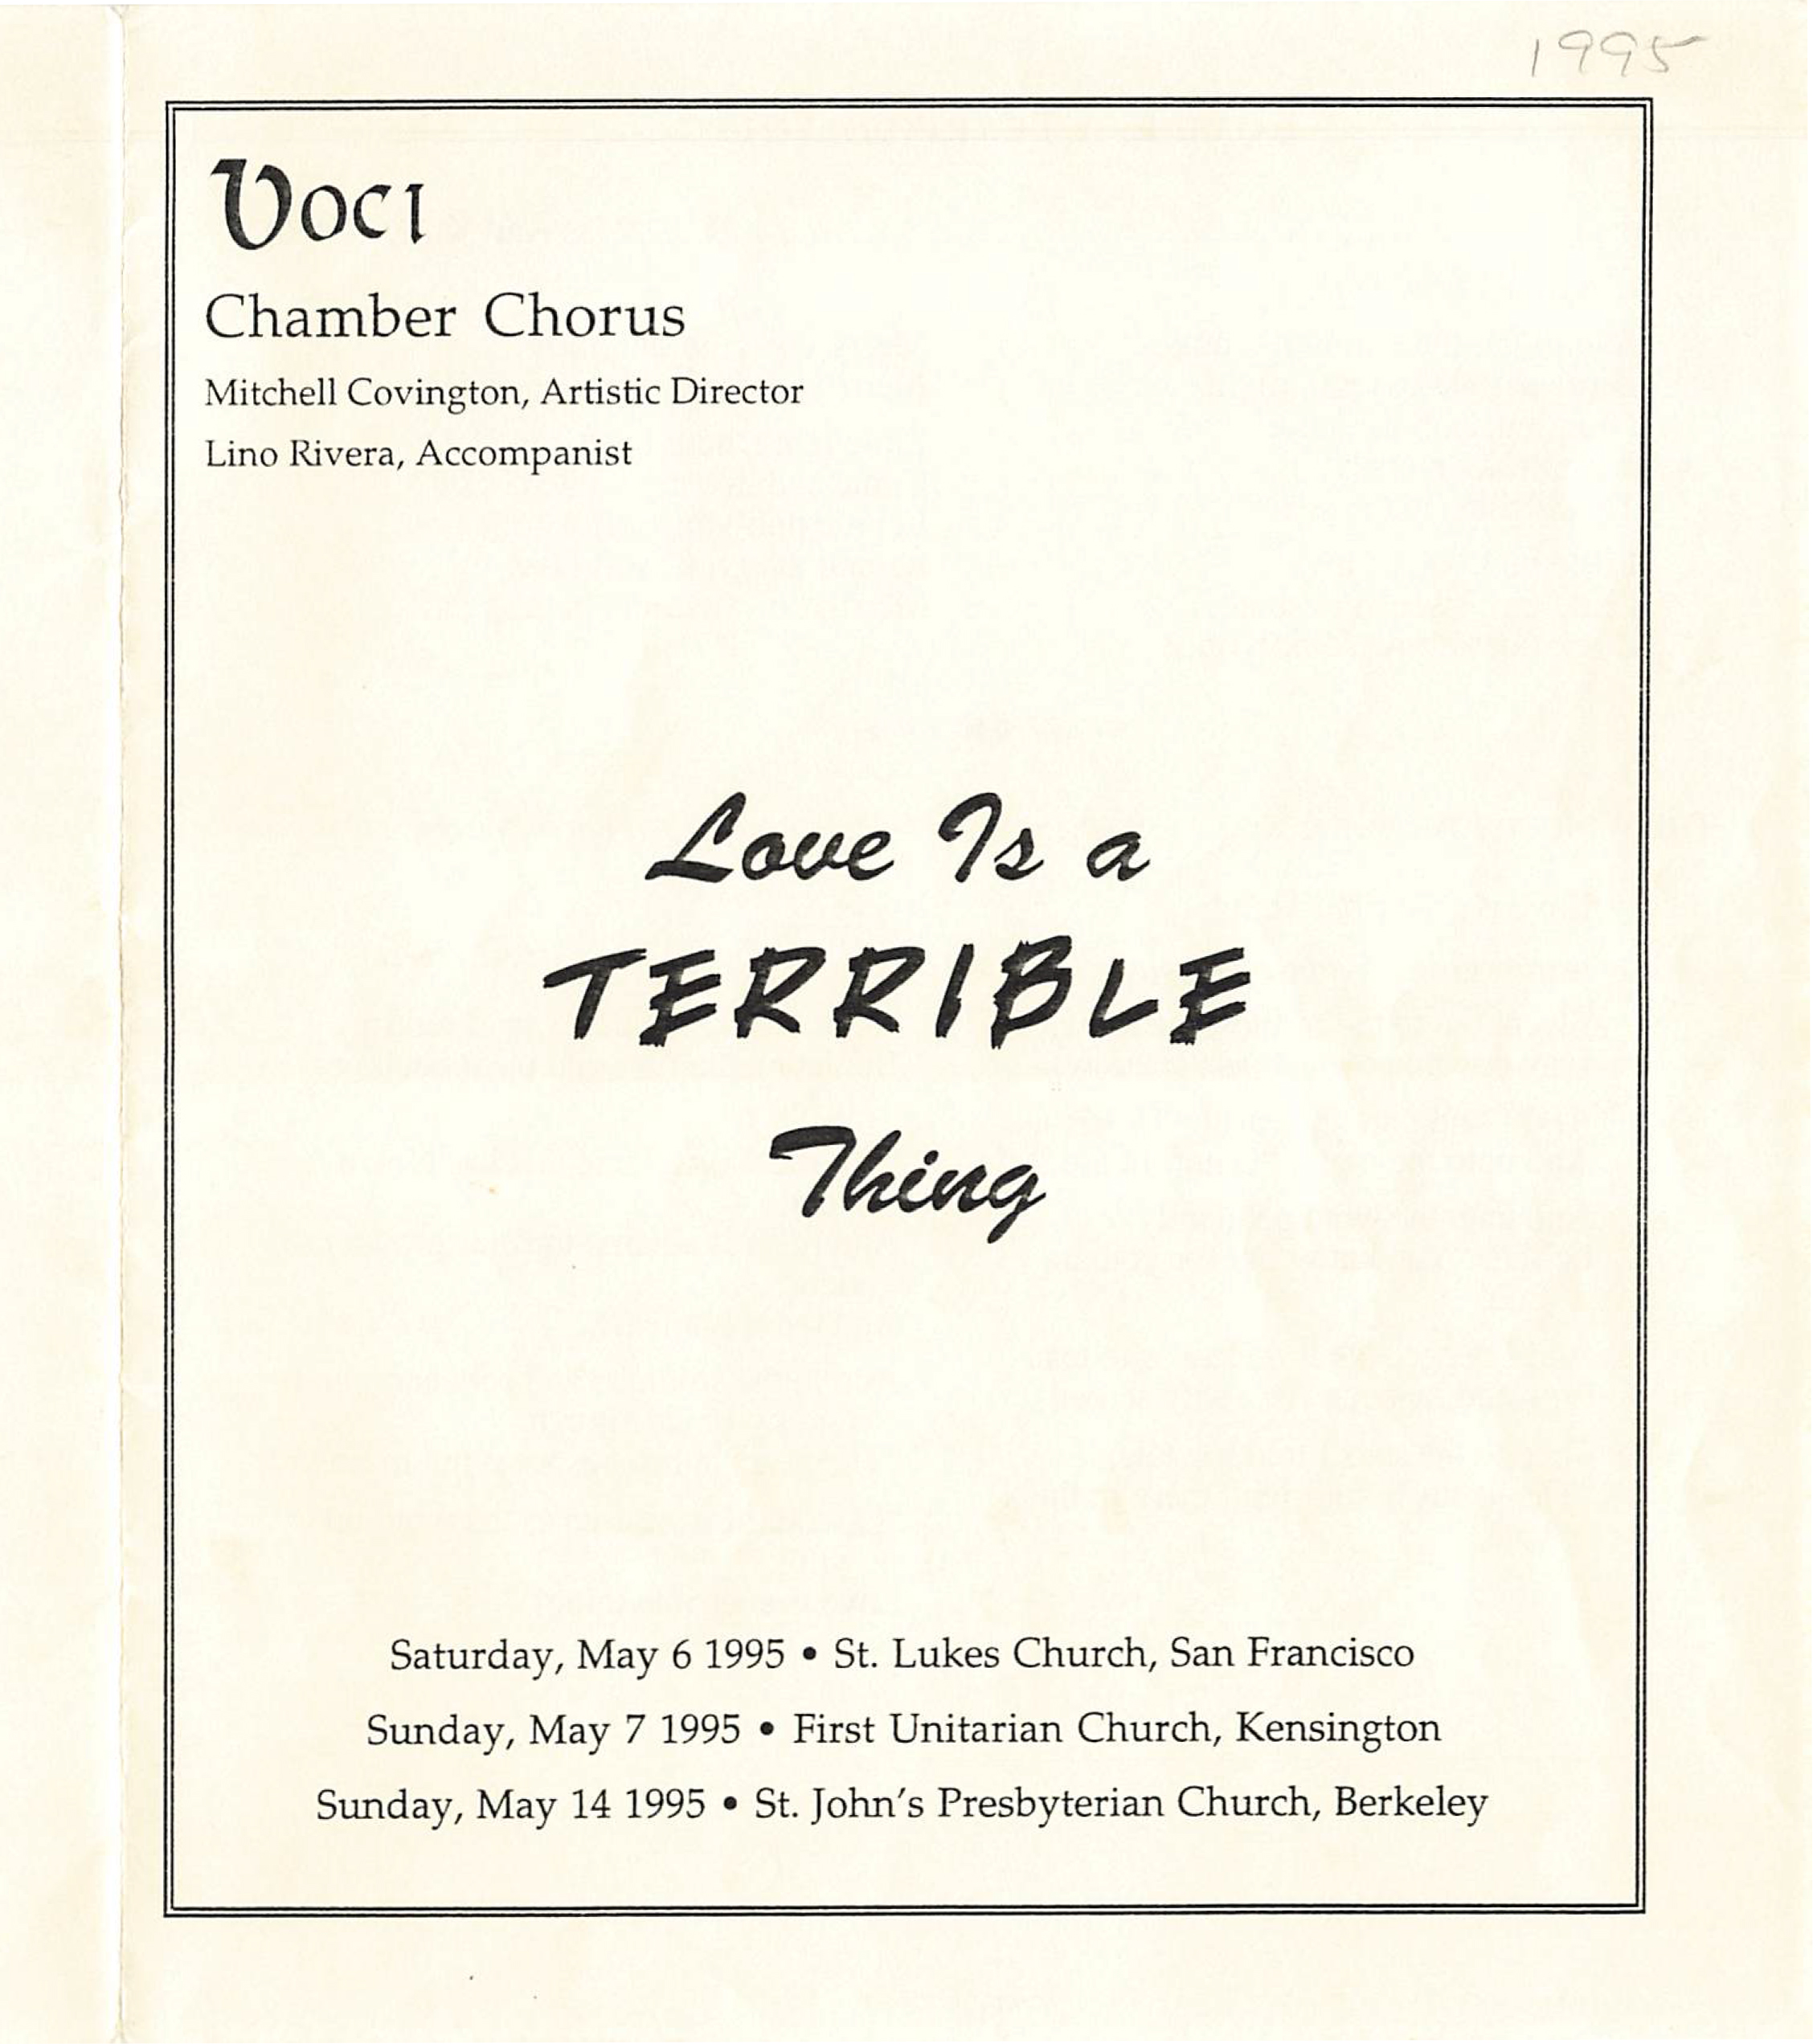 Love is a Terrible Thing: 20th Century Concert